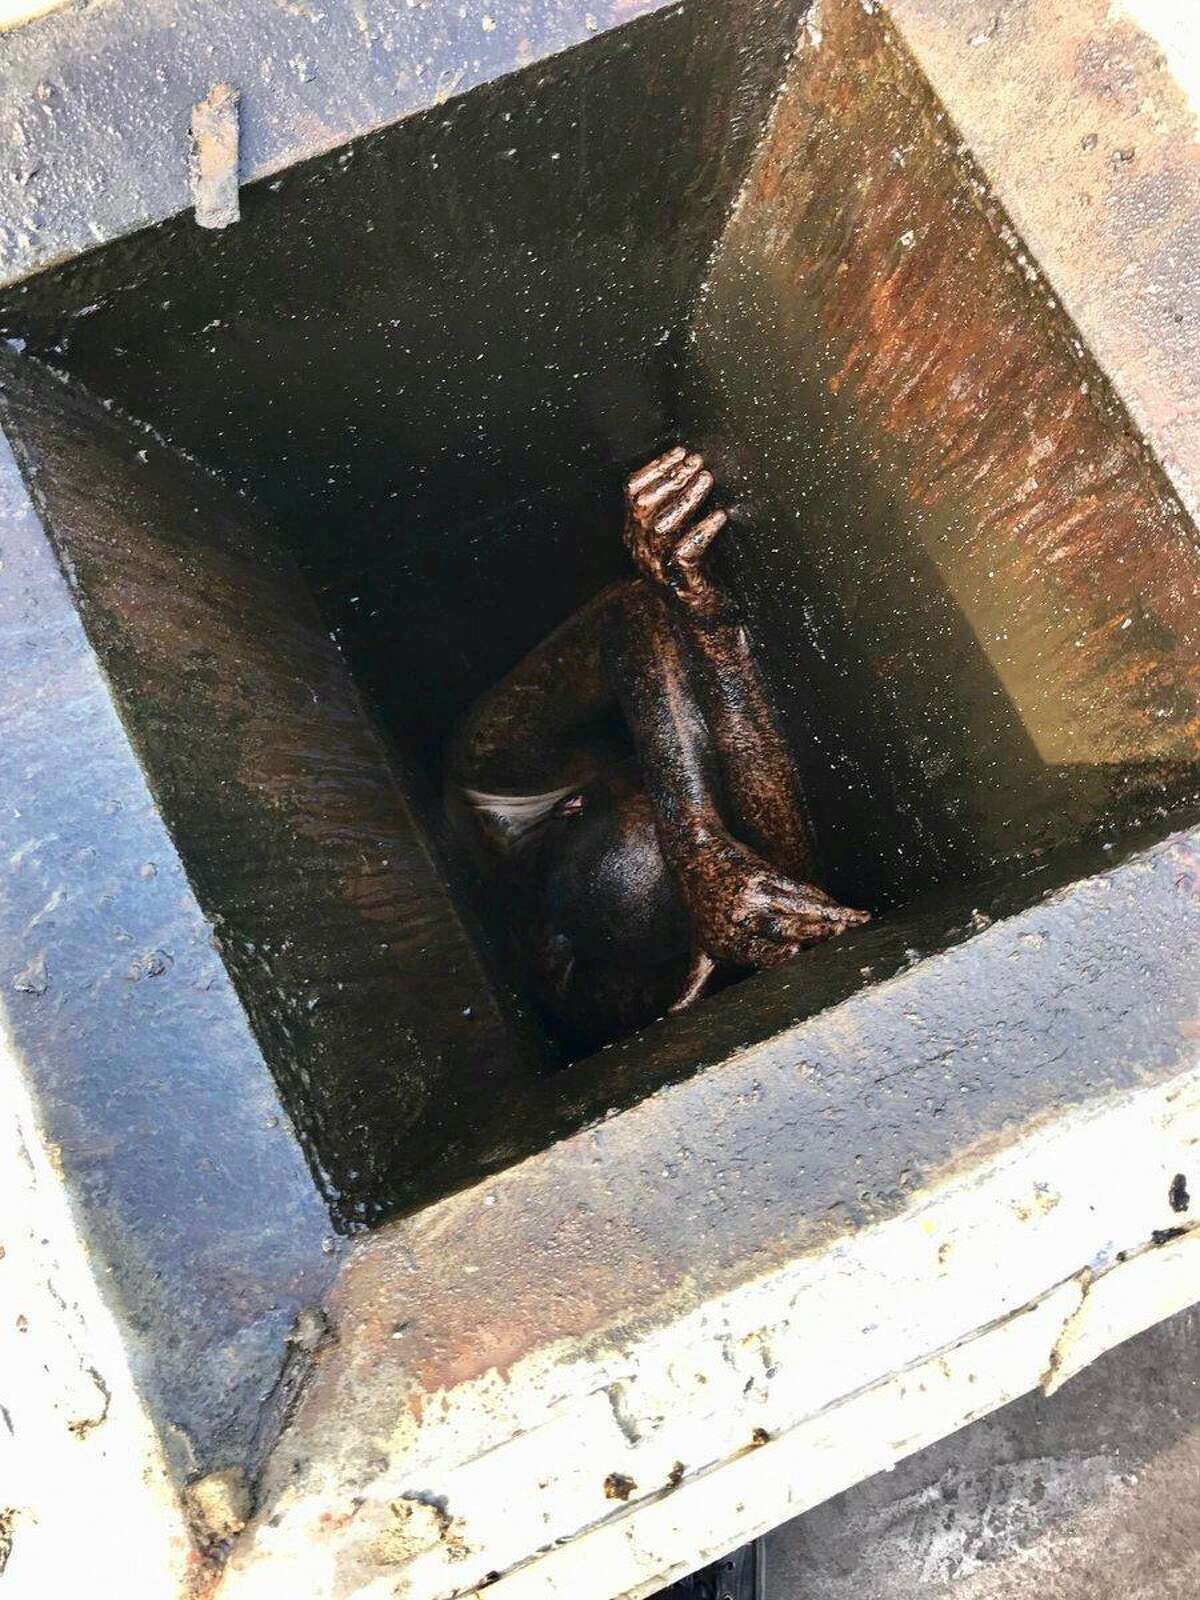 Alameda County officials on Dec. 12, 2018 rescued a man trapped in a San Lorenzo restaurant’s grease vent for two days.